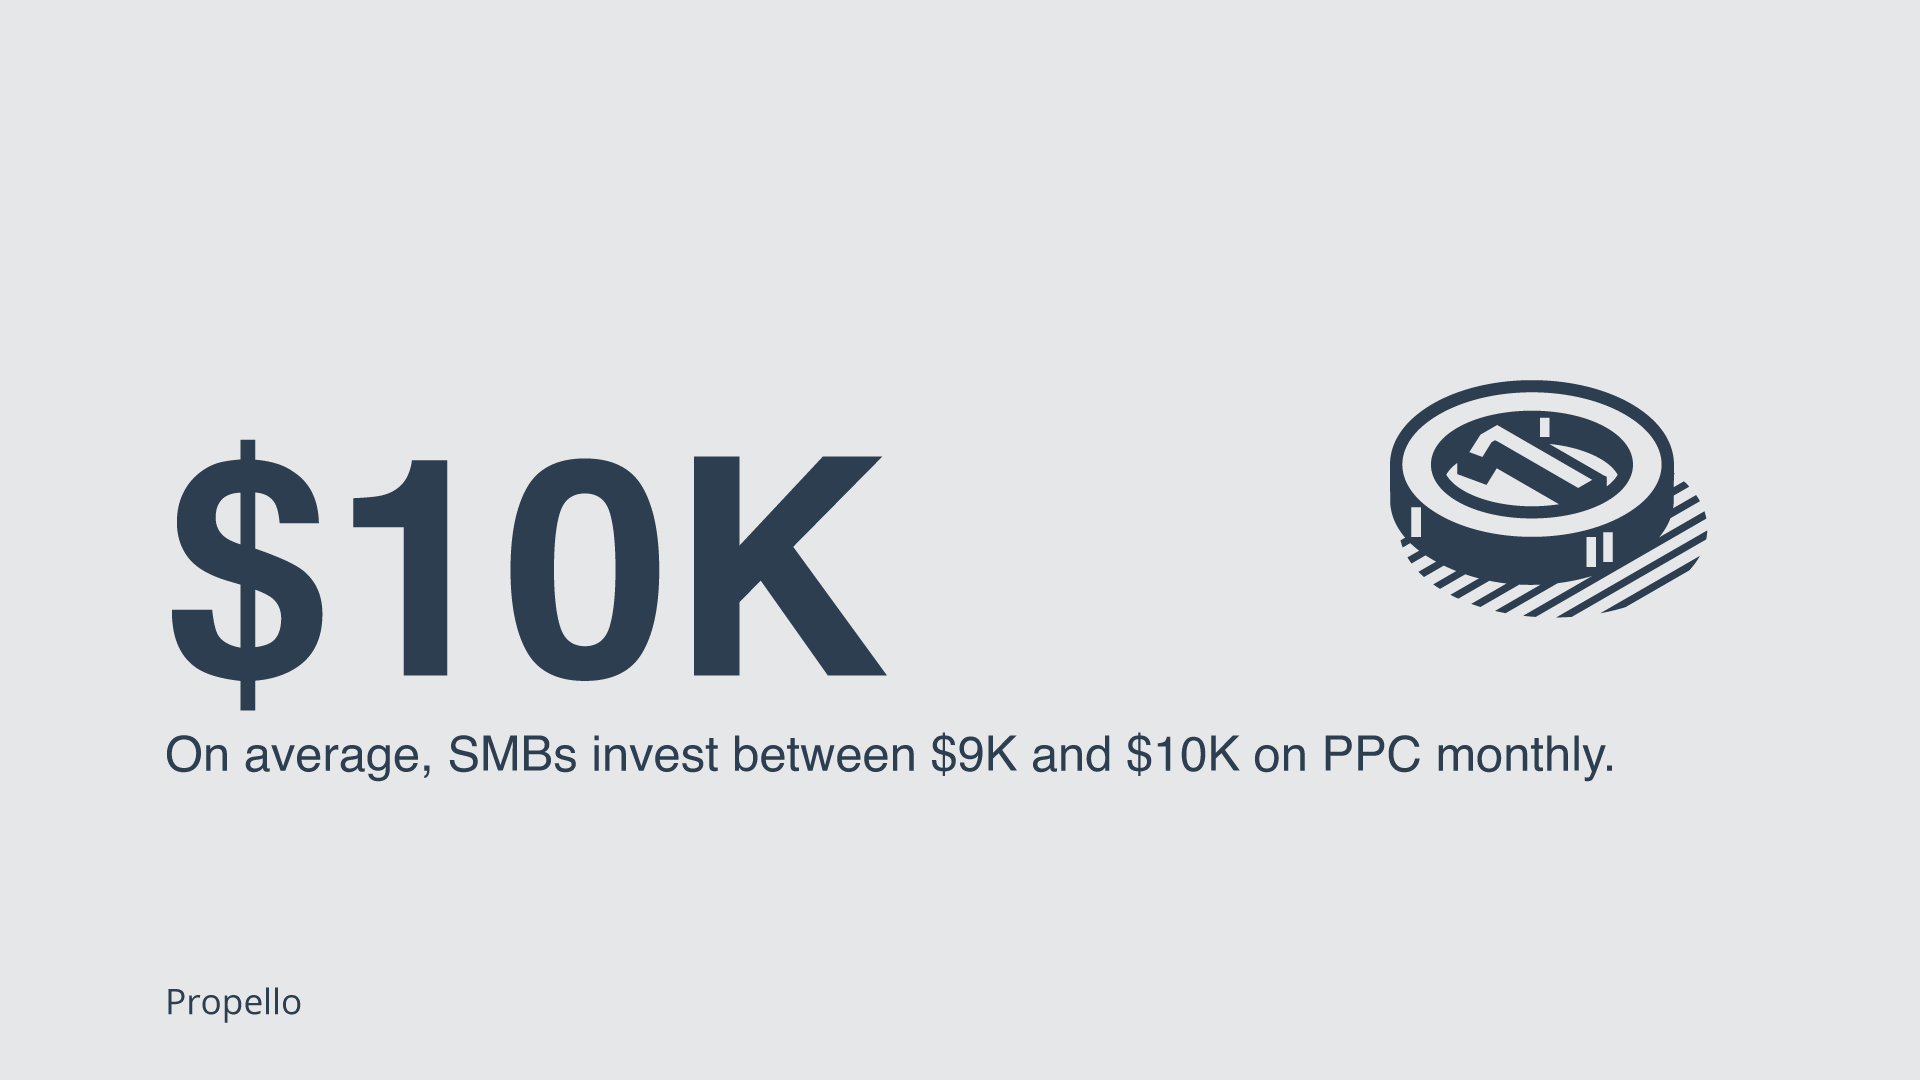 On average, SMBs invest between $9K and $10K on PPC monthly.